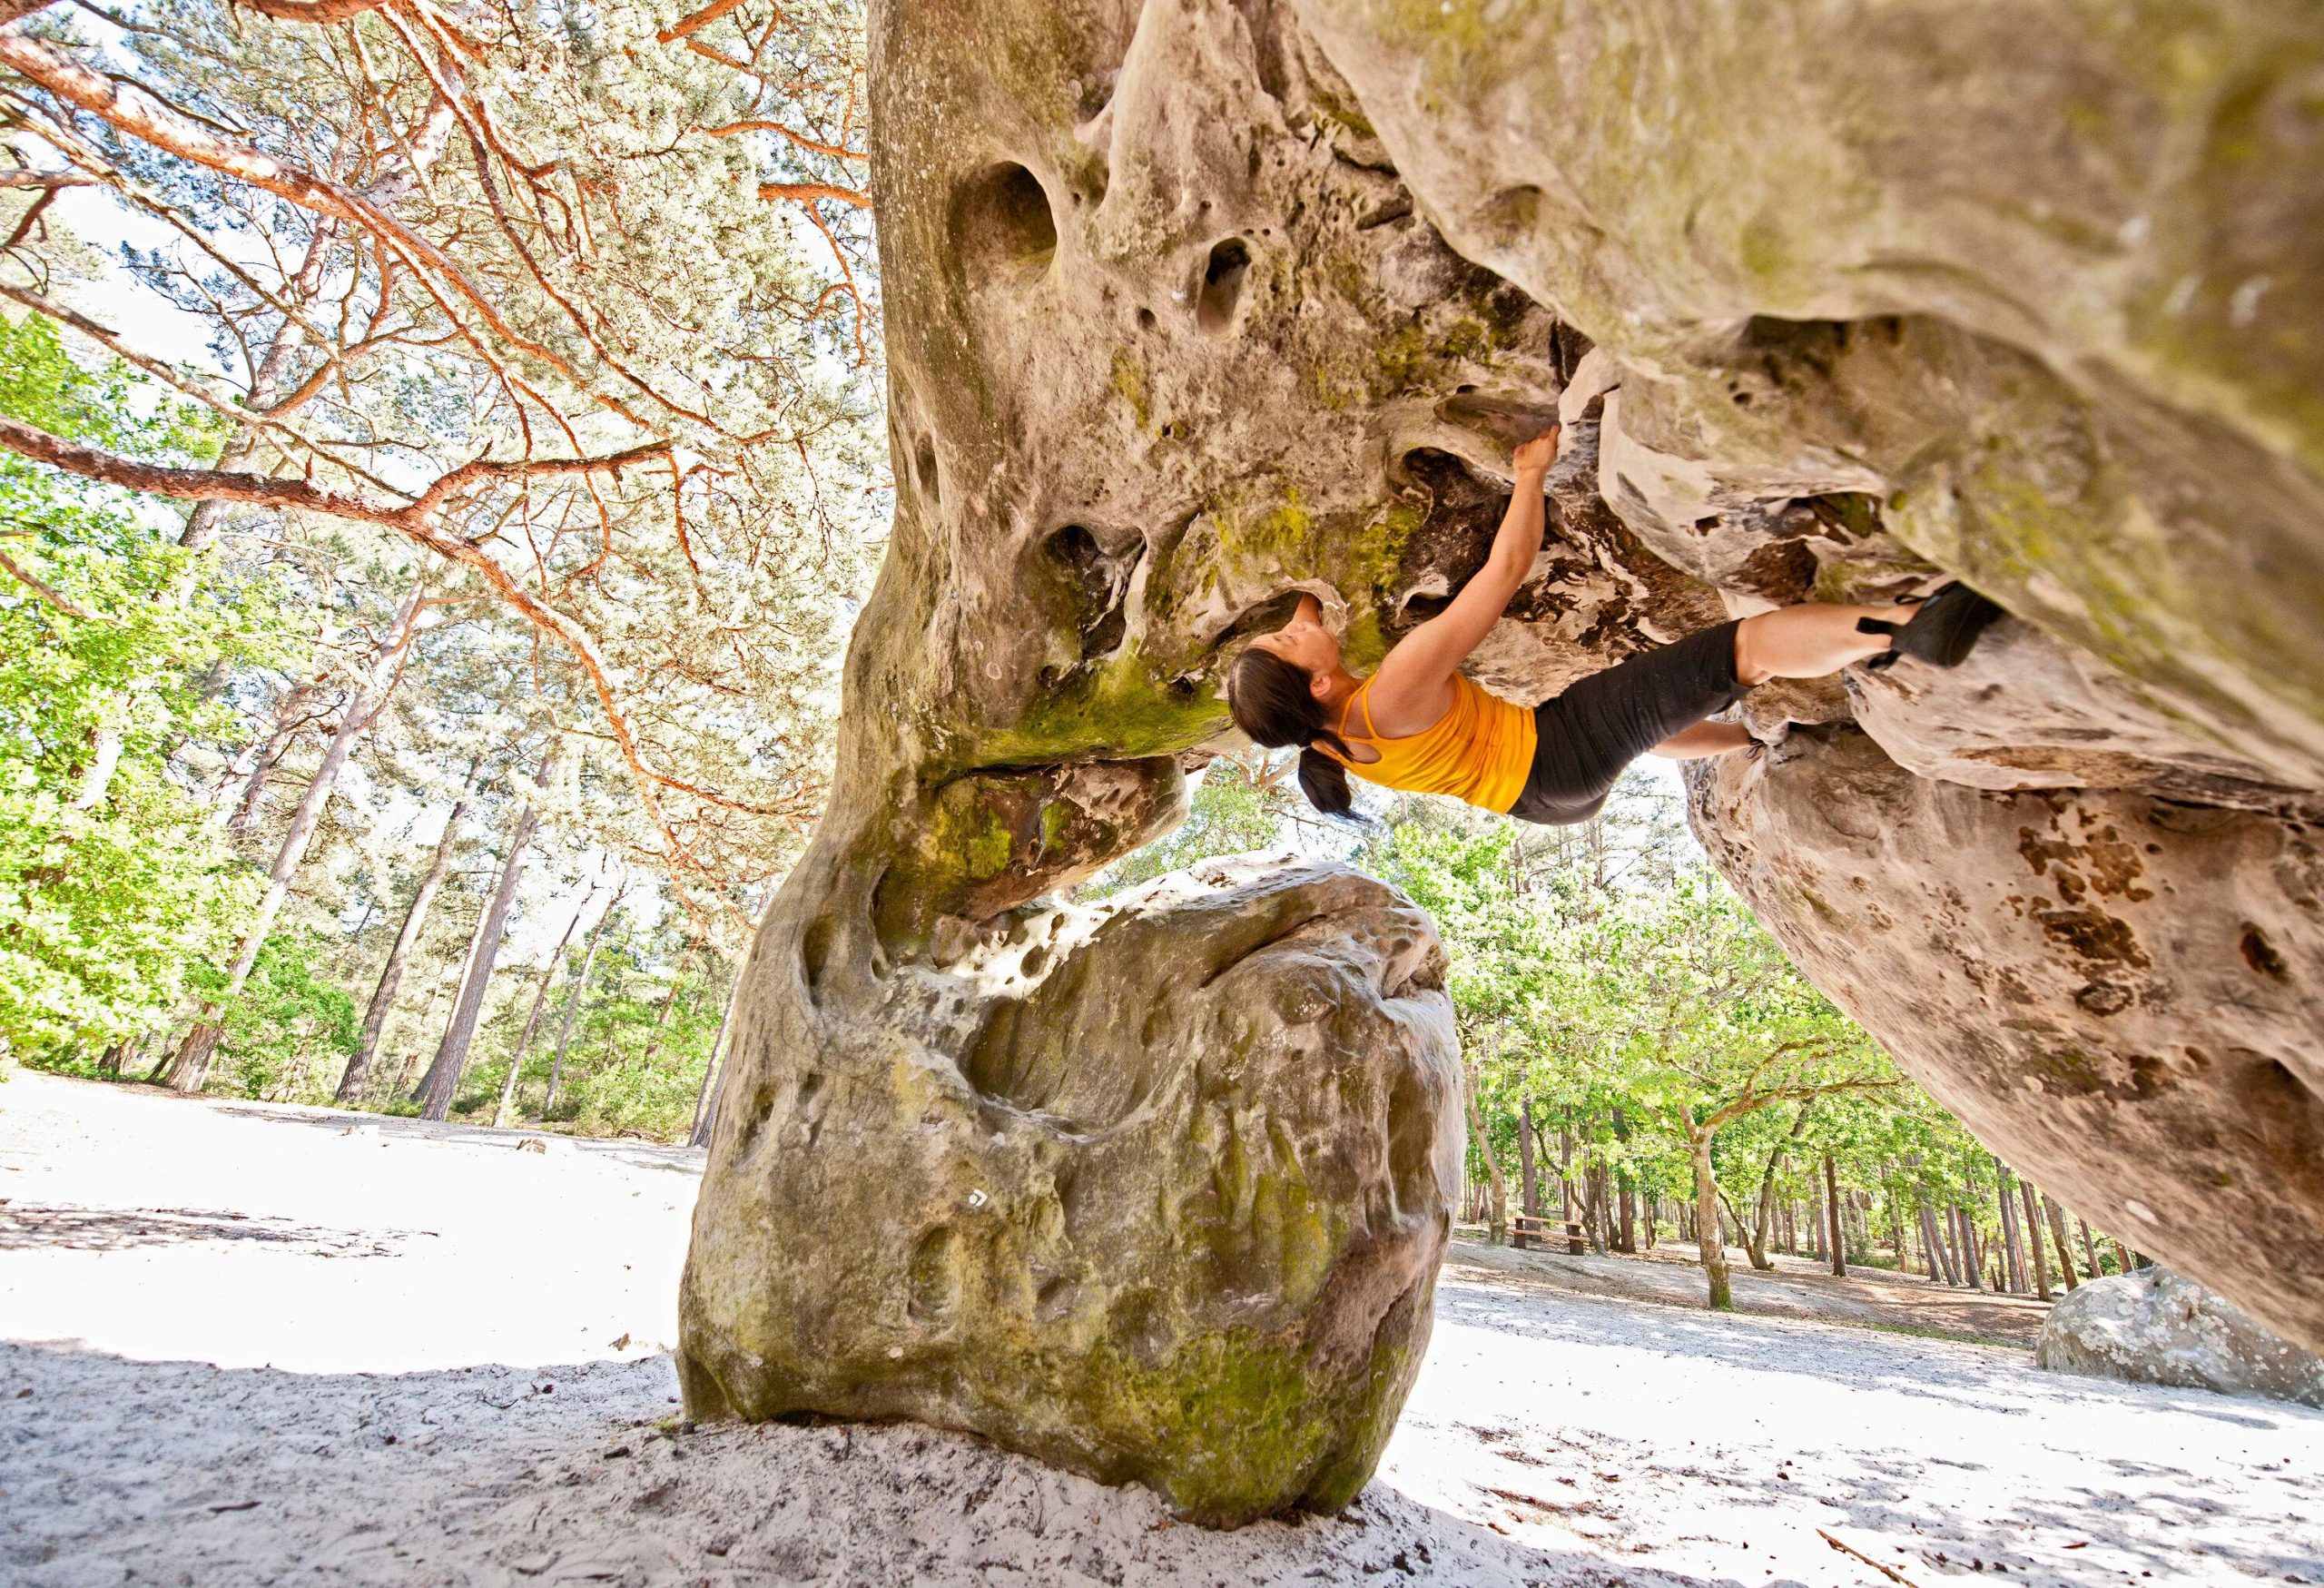 A fit lady climbs on a spectacular rock formation in the sunlit forest.